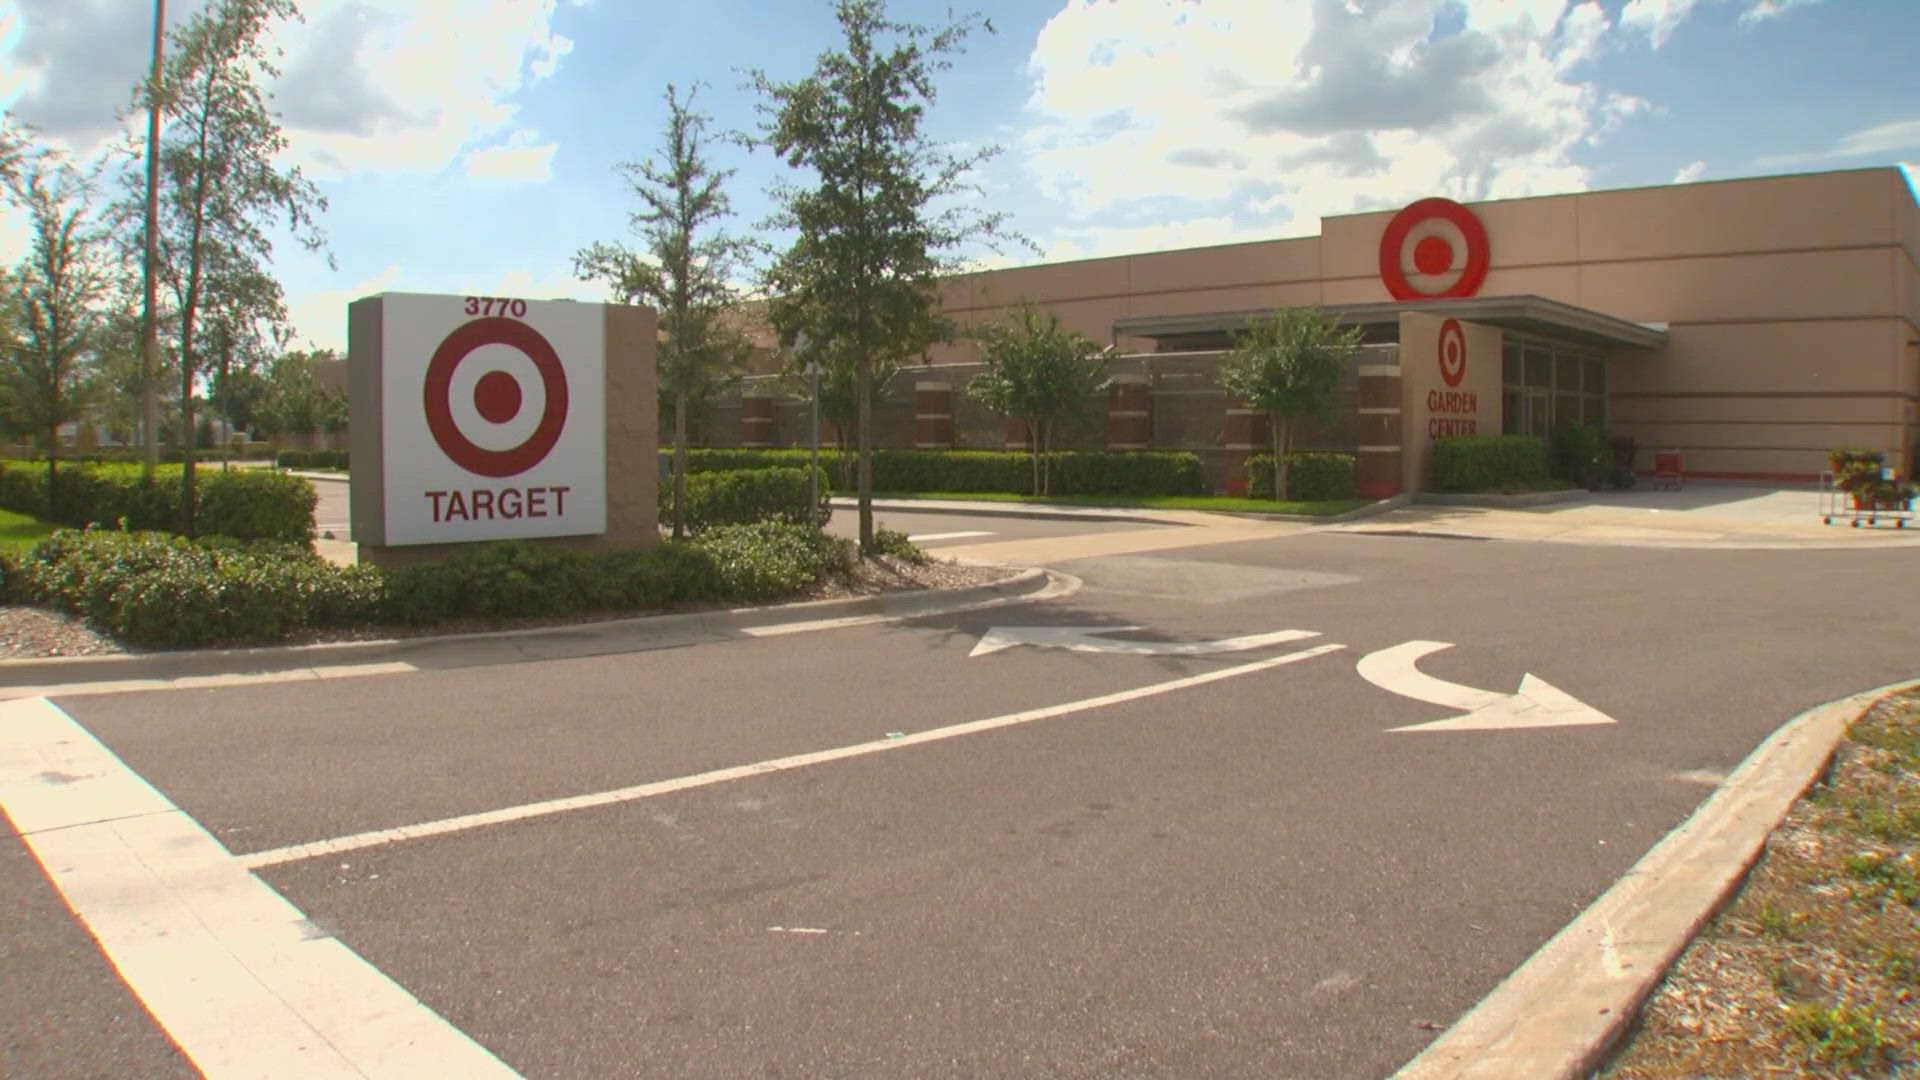 Target has recently cut prices in an effort to lure customers back.